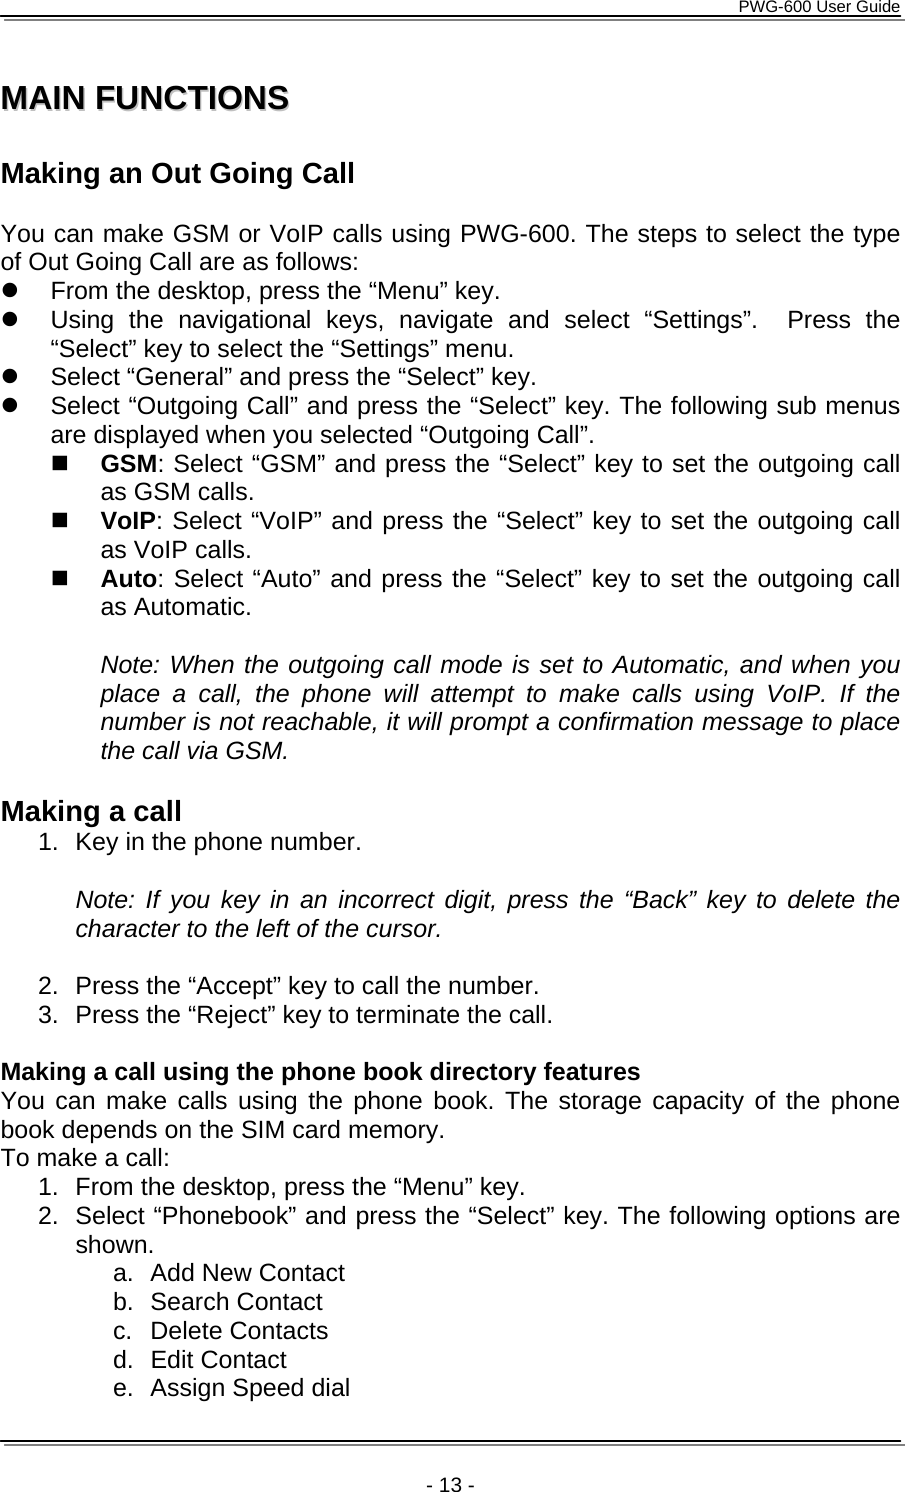      PWG-600 User Guide    - 13 - MMAAIINN  FFUUNNCCTTIIOONNSS   Making an Out Going Call  You can make GSM or VoIP calls using PWG-600. The steps to select the type of Out Going Call are as follows: z  From the desktop, press the “Menu” key. z  Using the navigational keys, navigate and select “Settings”.  Press the “Select” key to select the “Settings” menu. z  Select “General” and press the “Select” key. z  Select “Outgoing Call” and press the “Select” key. The following sub menus are displayed when you selected “Outgoing Call”.  GSM: Select “GSM” and press the “Select” key to set the outgoing call as GSM calls.  VoIP: Select “VoIP” and press the “Select” key to set the outgoing call as VoIP calls.  Auto: Select “Auto” and press the “Select” key to set the outgoing call as Automatic.  Note: When the outgoing call mode is set to Automatic, and when you place a call, the phone will attempt to make calls using VoIP. If the number is not reachable, it will prompt a confirmation message to place the call via GSM.  Making a call 1.  Key in the phone number.   Note: If you key in an incorrect digit, press the “Back” key to delete the character to the left of the cursor.  2.  Press the “Accept” key to call the number. 3.  Press the “Reject” key to terminate the call.  Making a call using the phone book directory features You can make calls using the phone book. The storage capacity of the phone book depends on the SIM card memory. To make a call: 1.  From the desktop, press the “Menu” key. 2.  Select “Phonebook” and press the “Select” key. The following options are shown. a.  Add New Contact b. Search Contact c. Delete Contacts d. Edit Contact e.  Assign Speed dial 